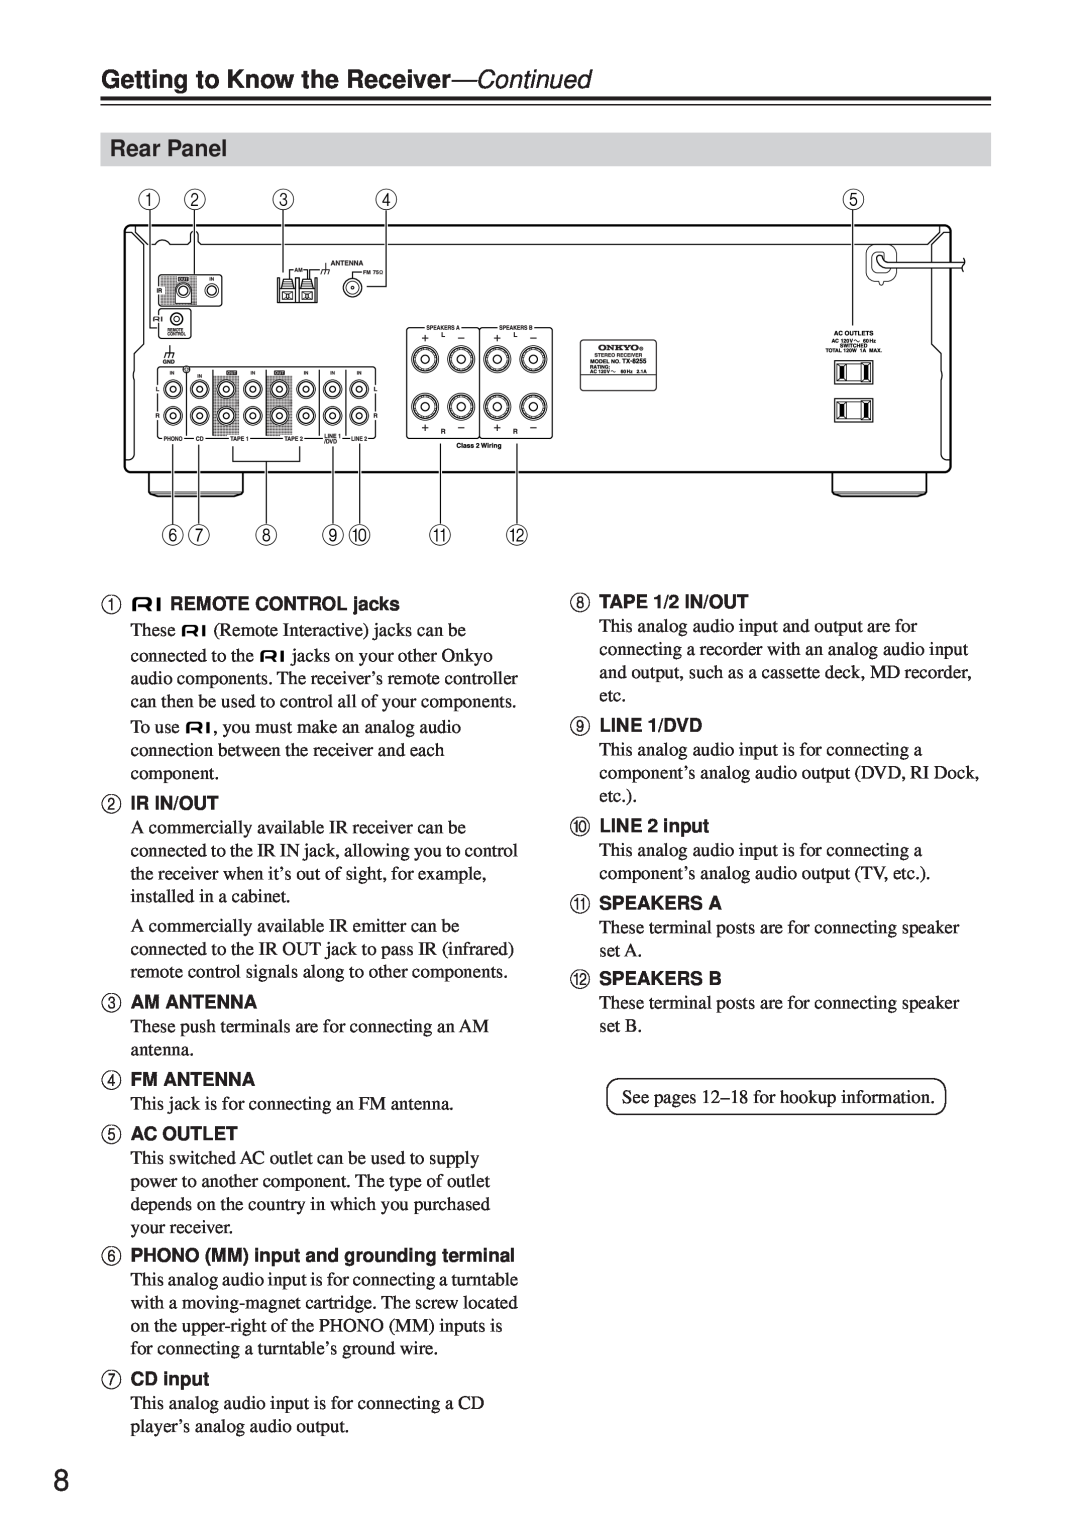 Onkyo TX-8255 instruction manual Rear Panel, Getting to Know the Receiver-Continued, 67 8 9J K L 